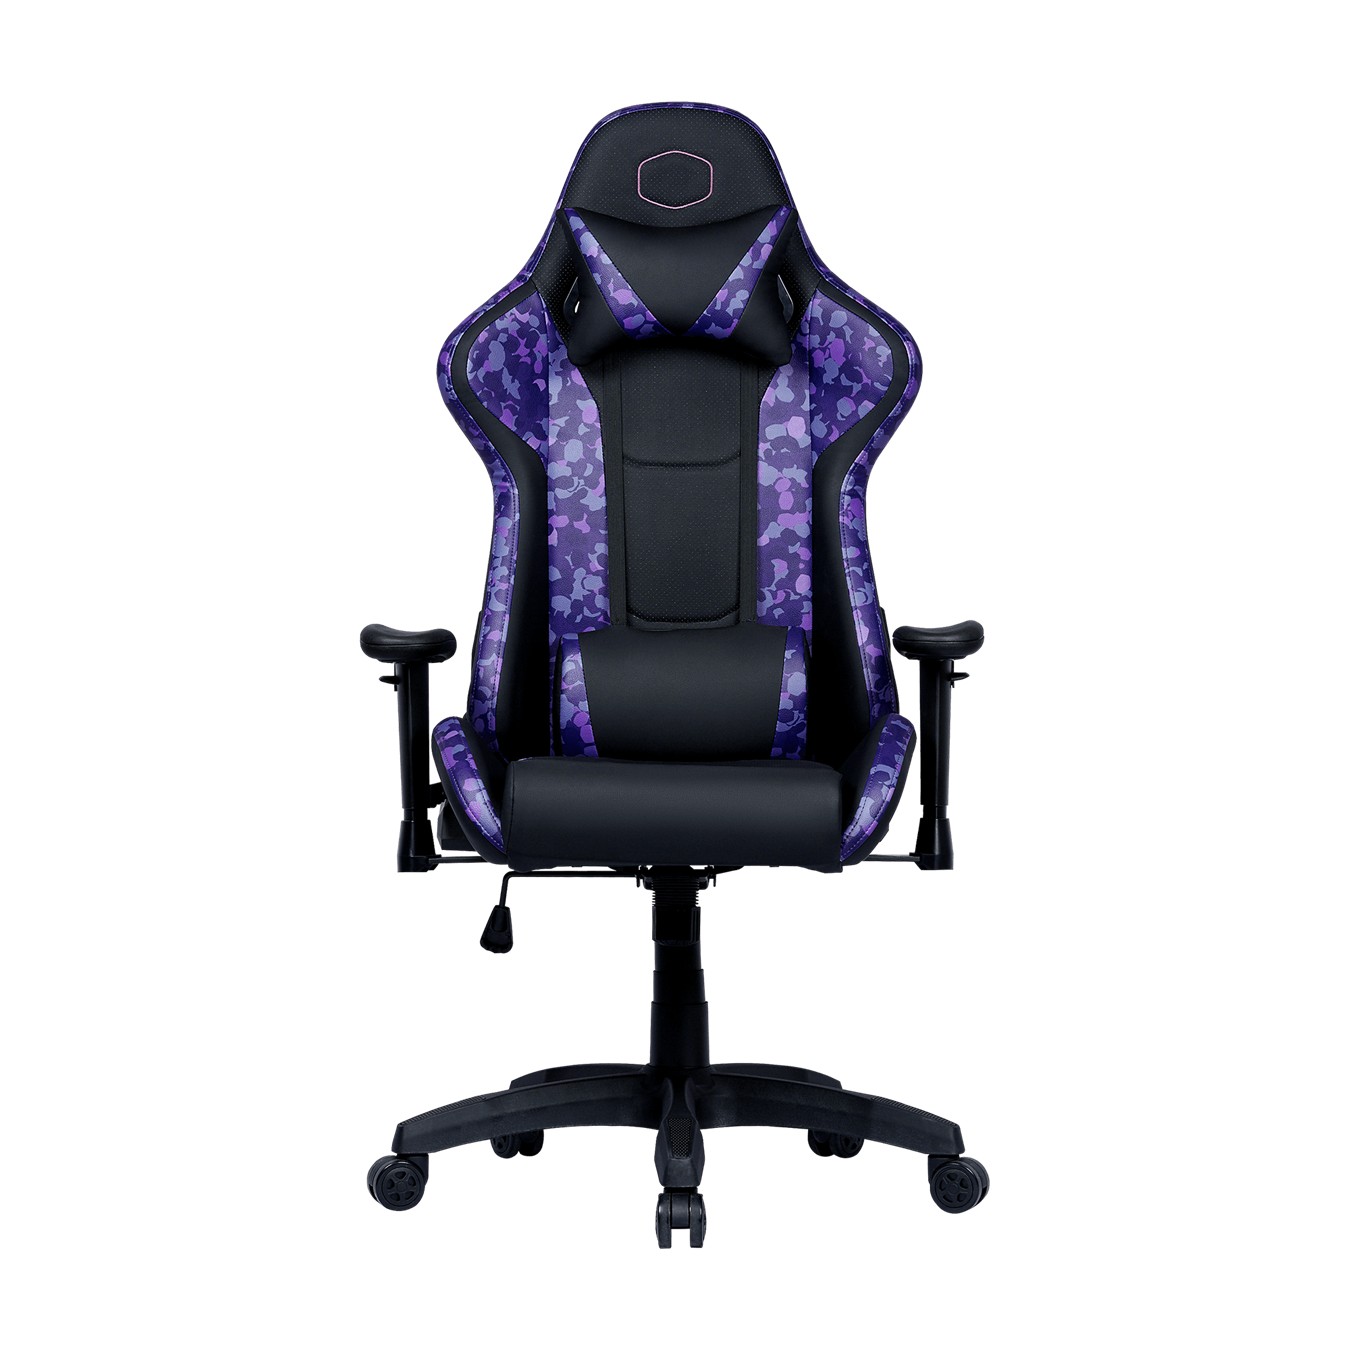 Caliber R1S CAMO Gaming Chair - Cooler Master Caliber R1S helps you achieve hard quests while staying dry and comfortable.